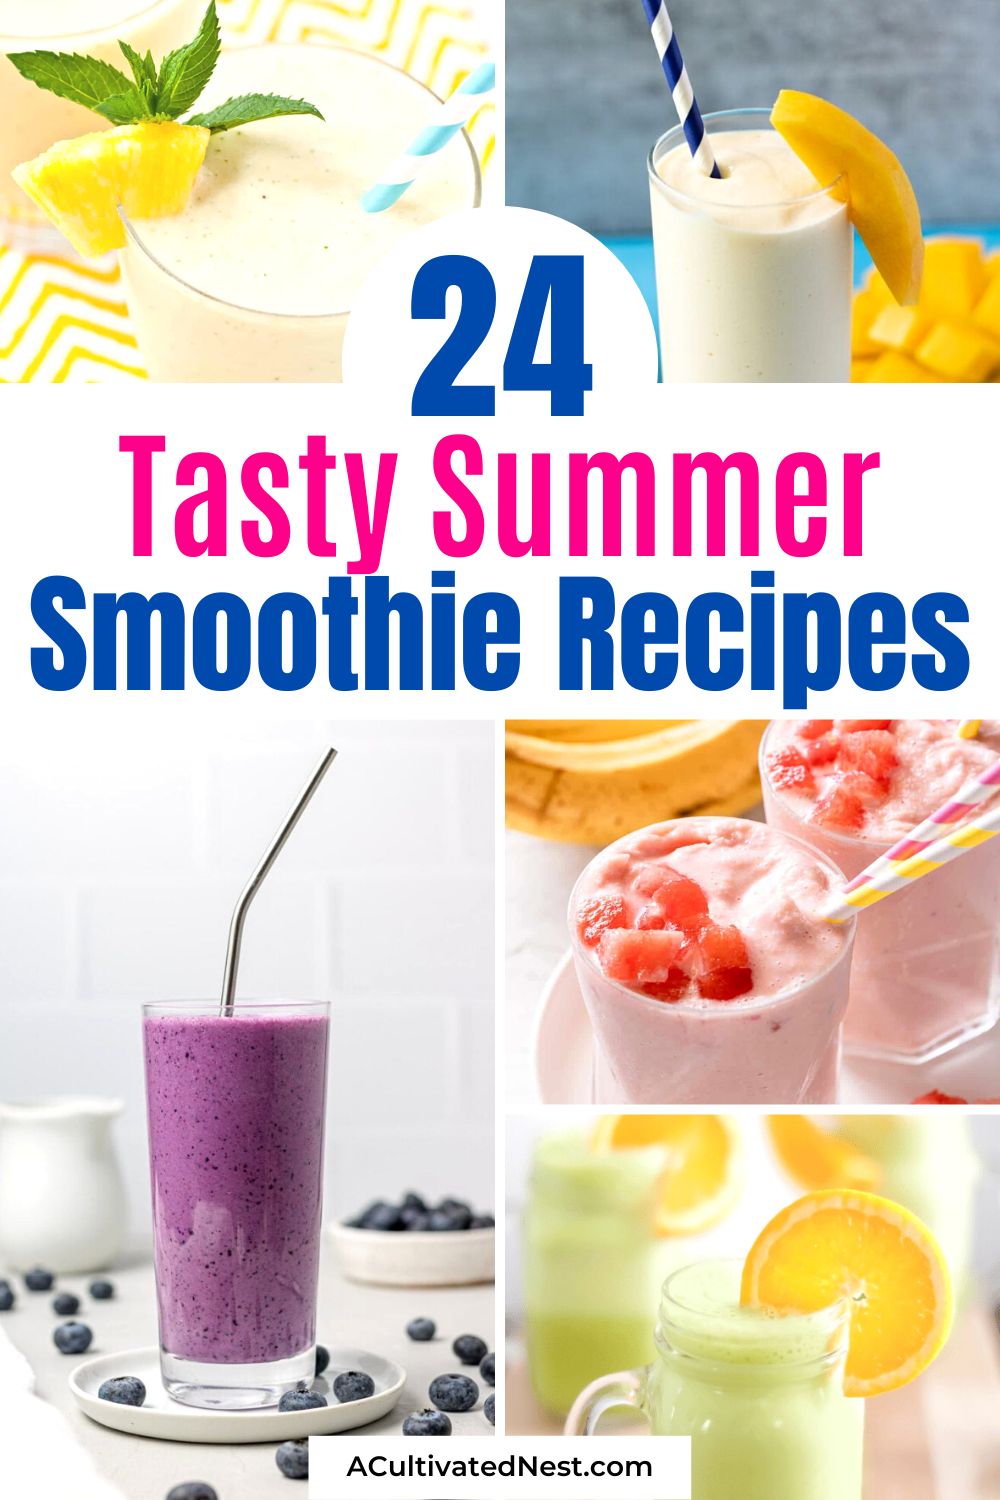 24 Easy Summer Smoothie Recipes to Try 